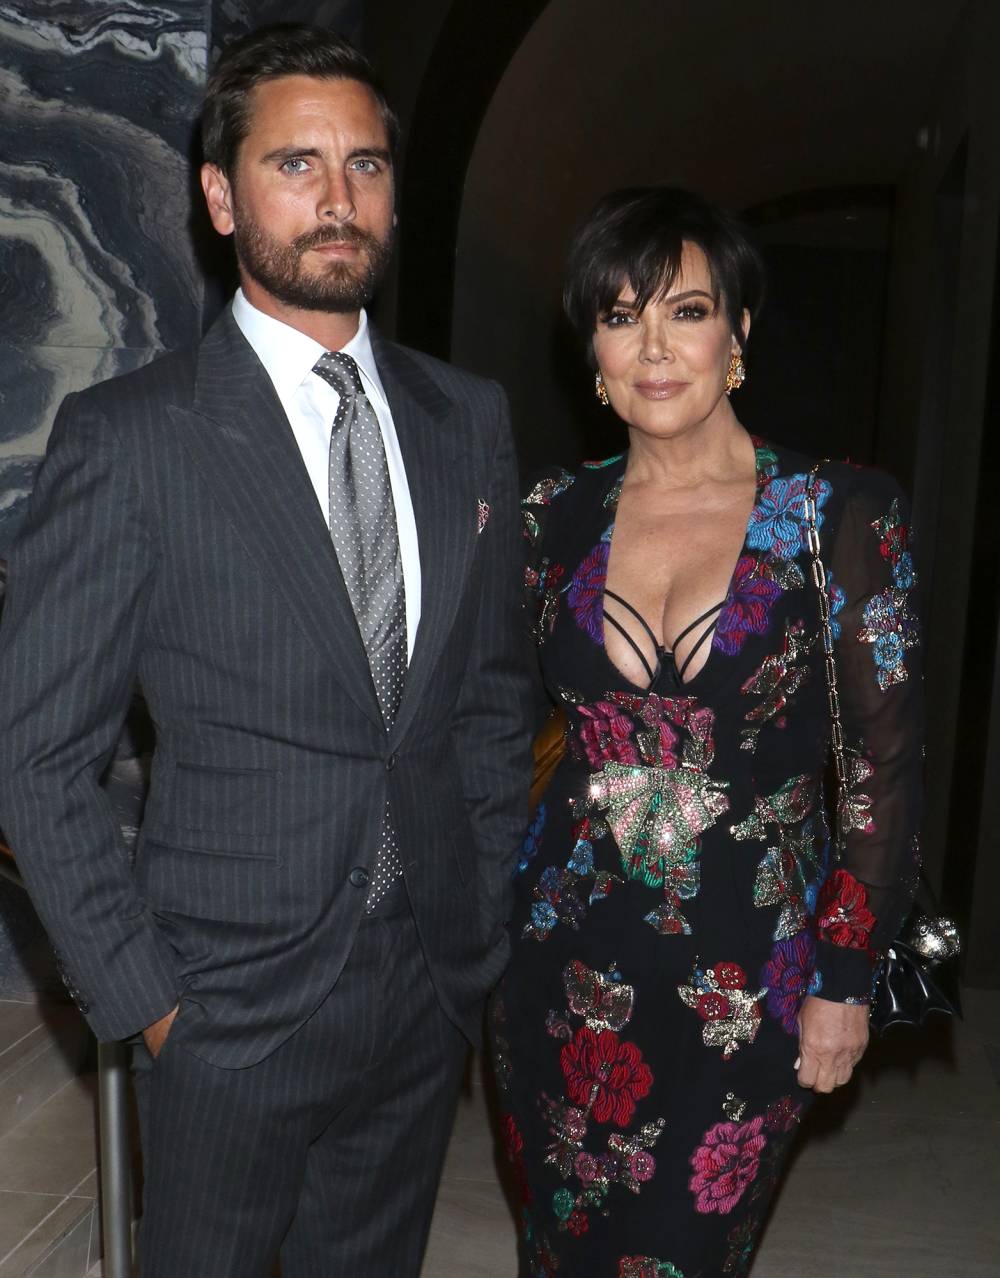 Kris Jenner Says Scott Disick ‘Will Never Be Excommunicated’ From Her Family: He's 'A Special Part' of It